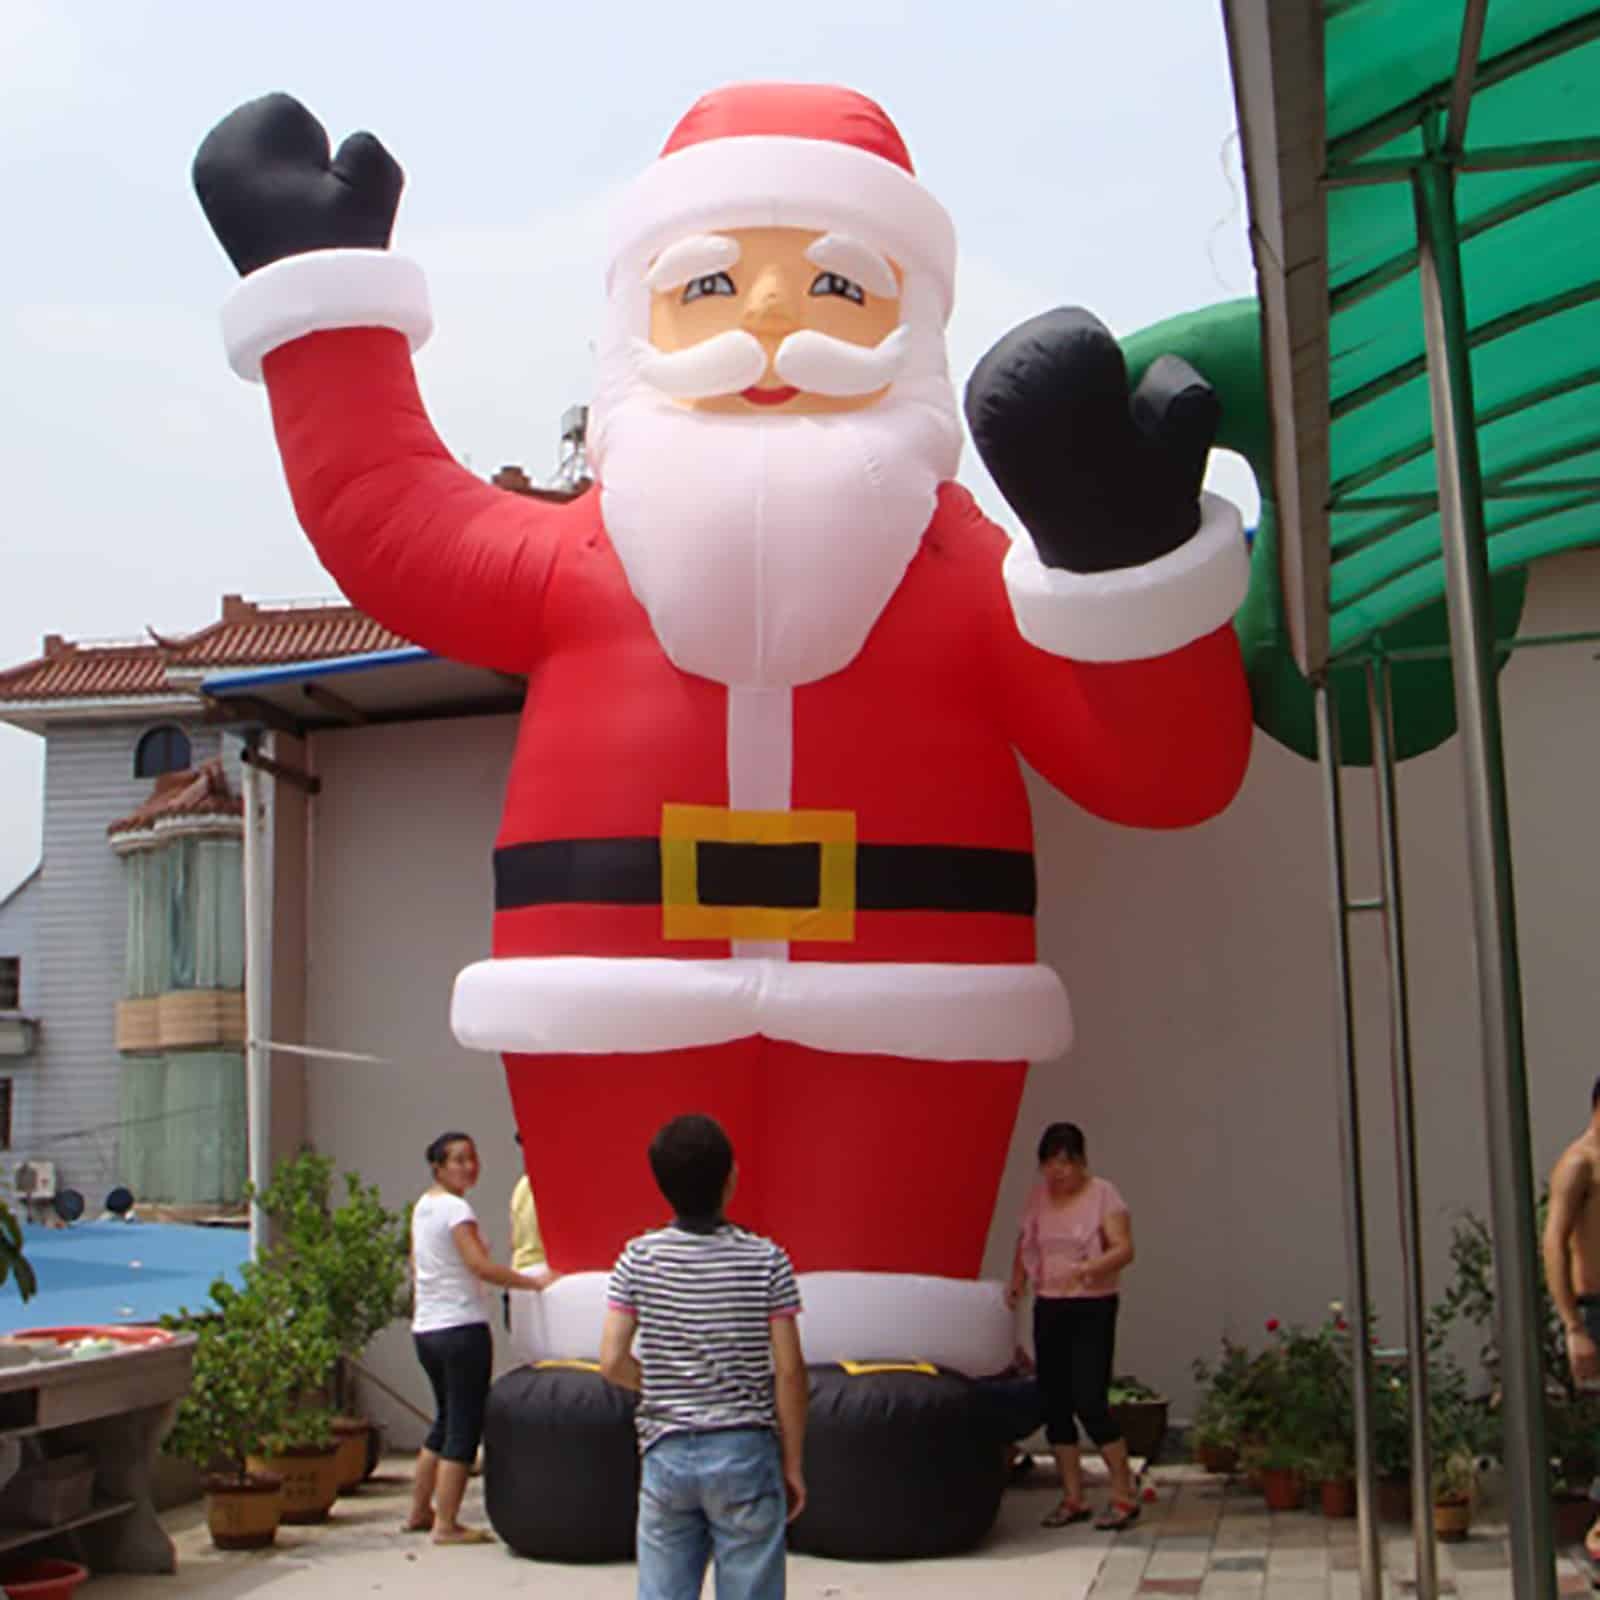 Giant Inflatable Christmas Decorations